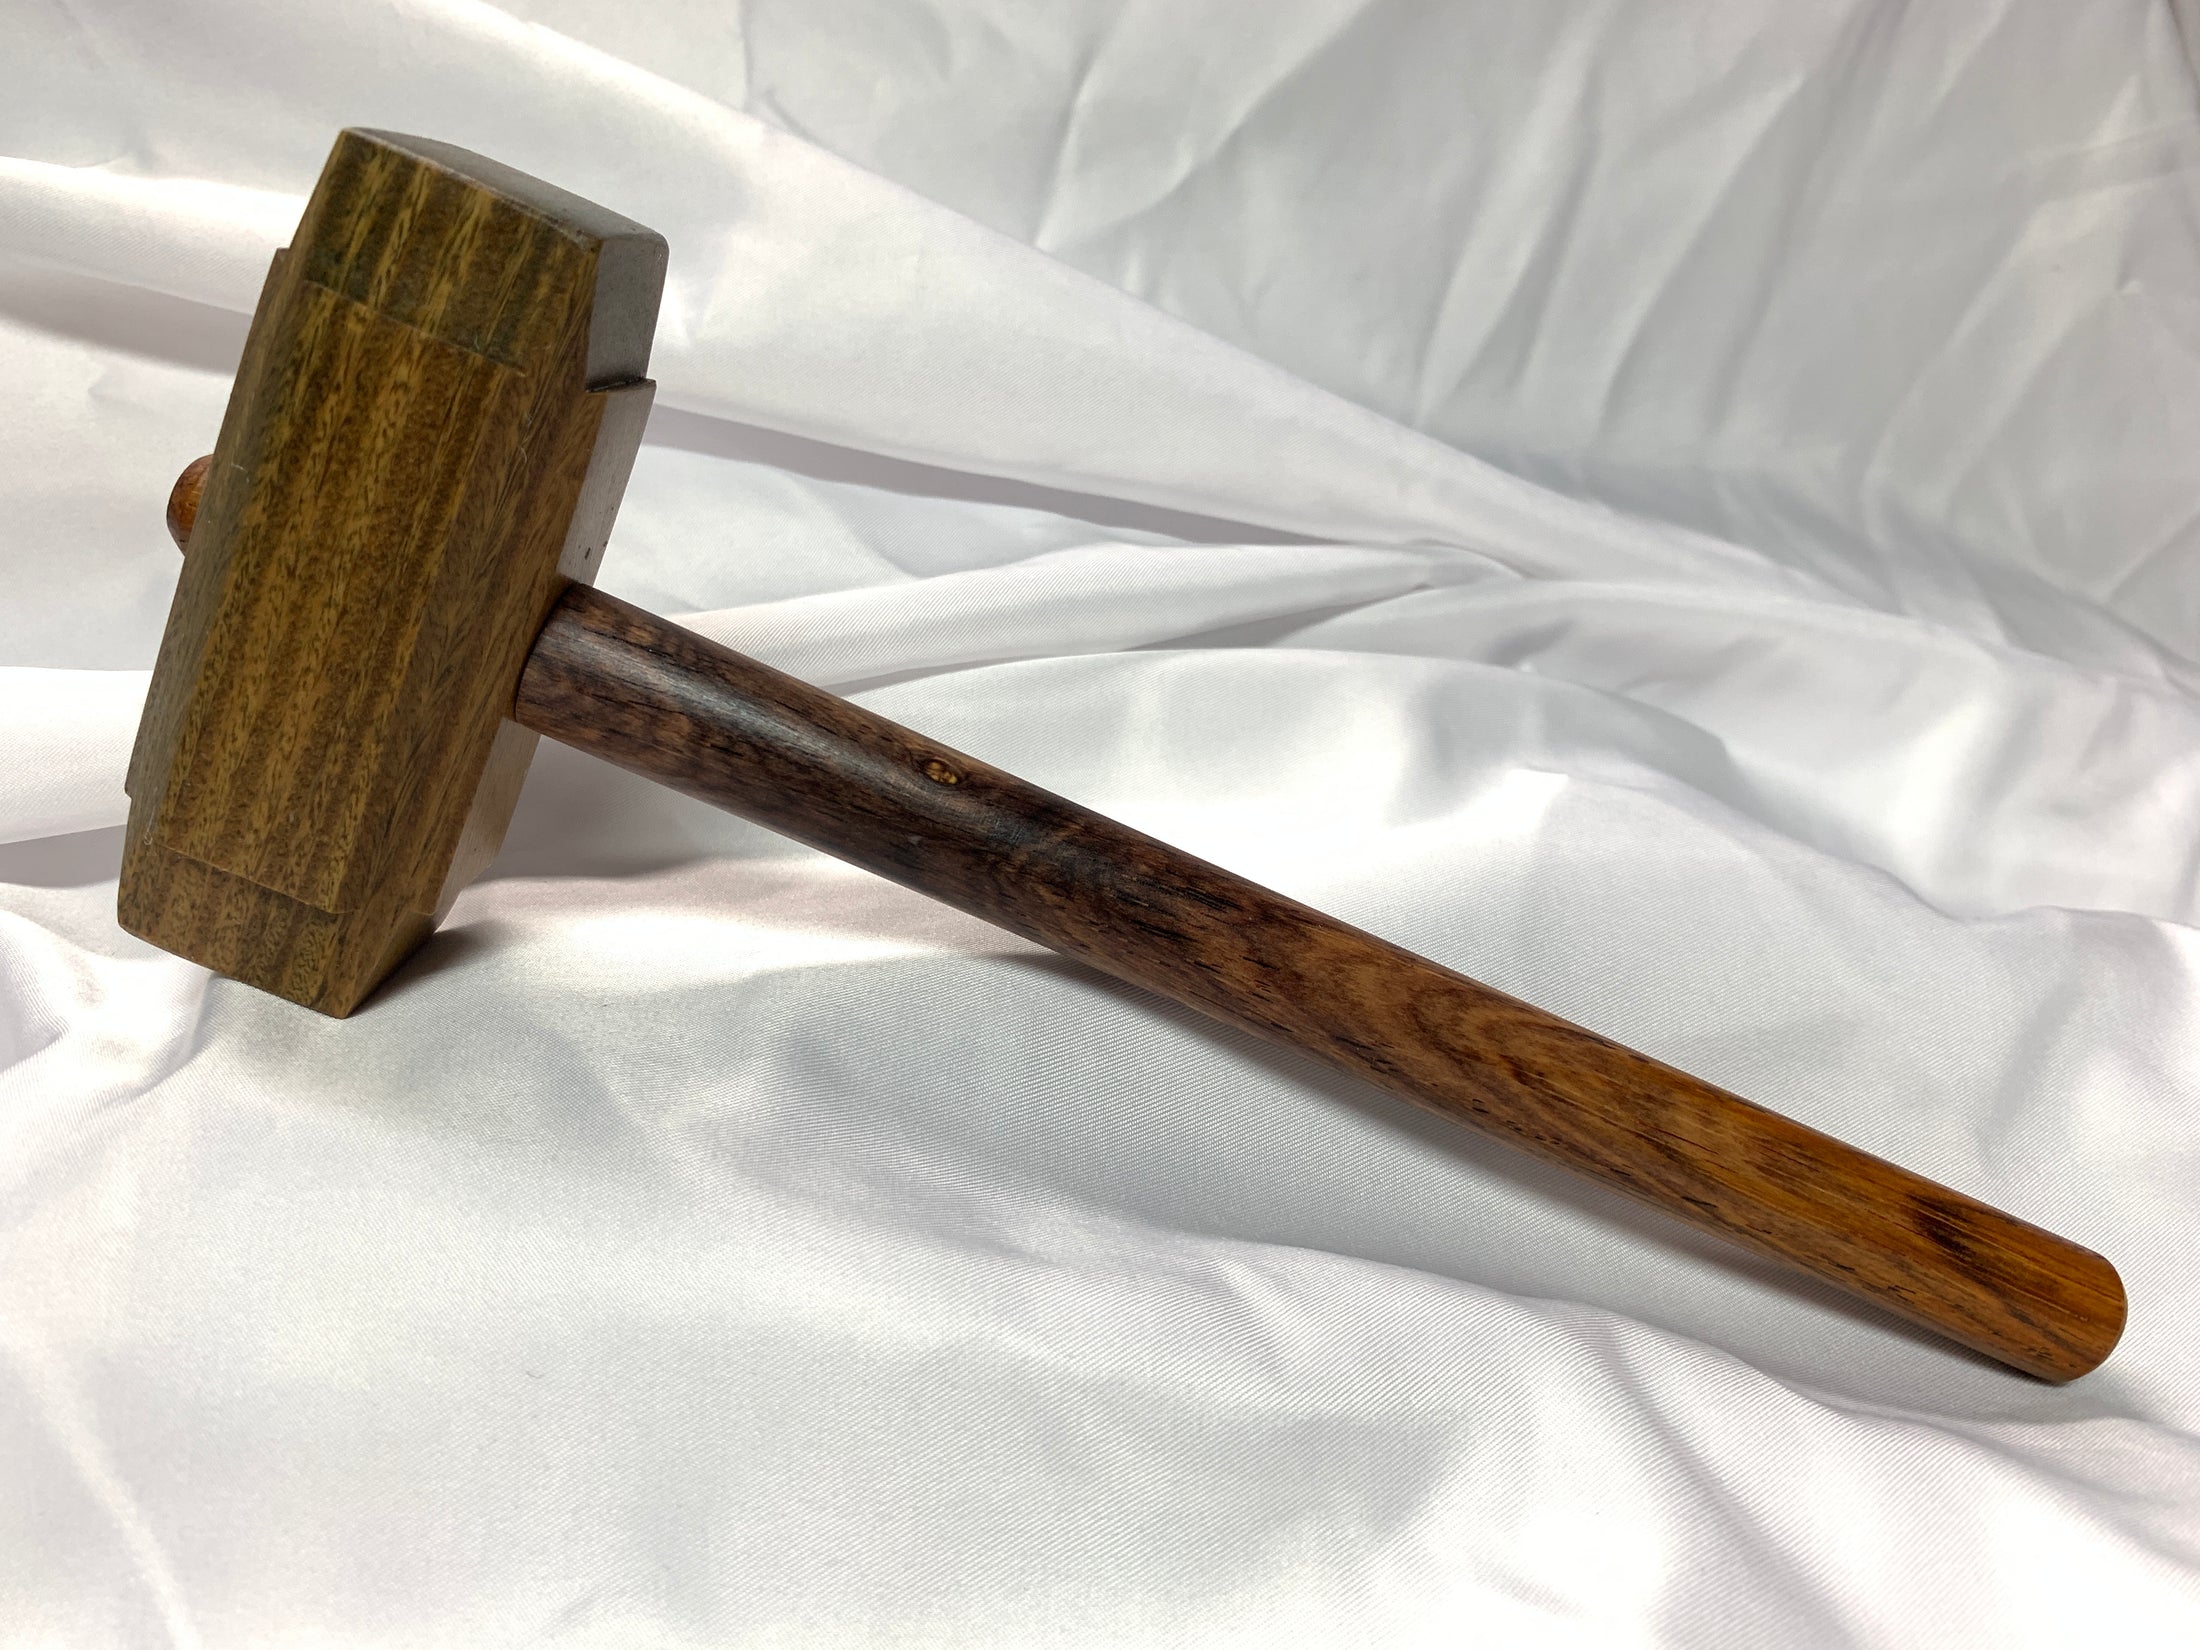 Thors Hammer Woodworking Mallet Lignum Vitae Head with Cocobolo Handle Kings Fine Woodworking